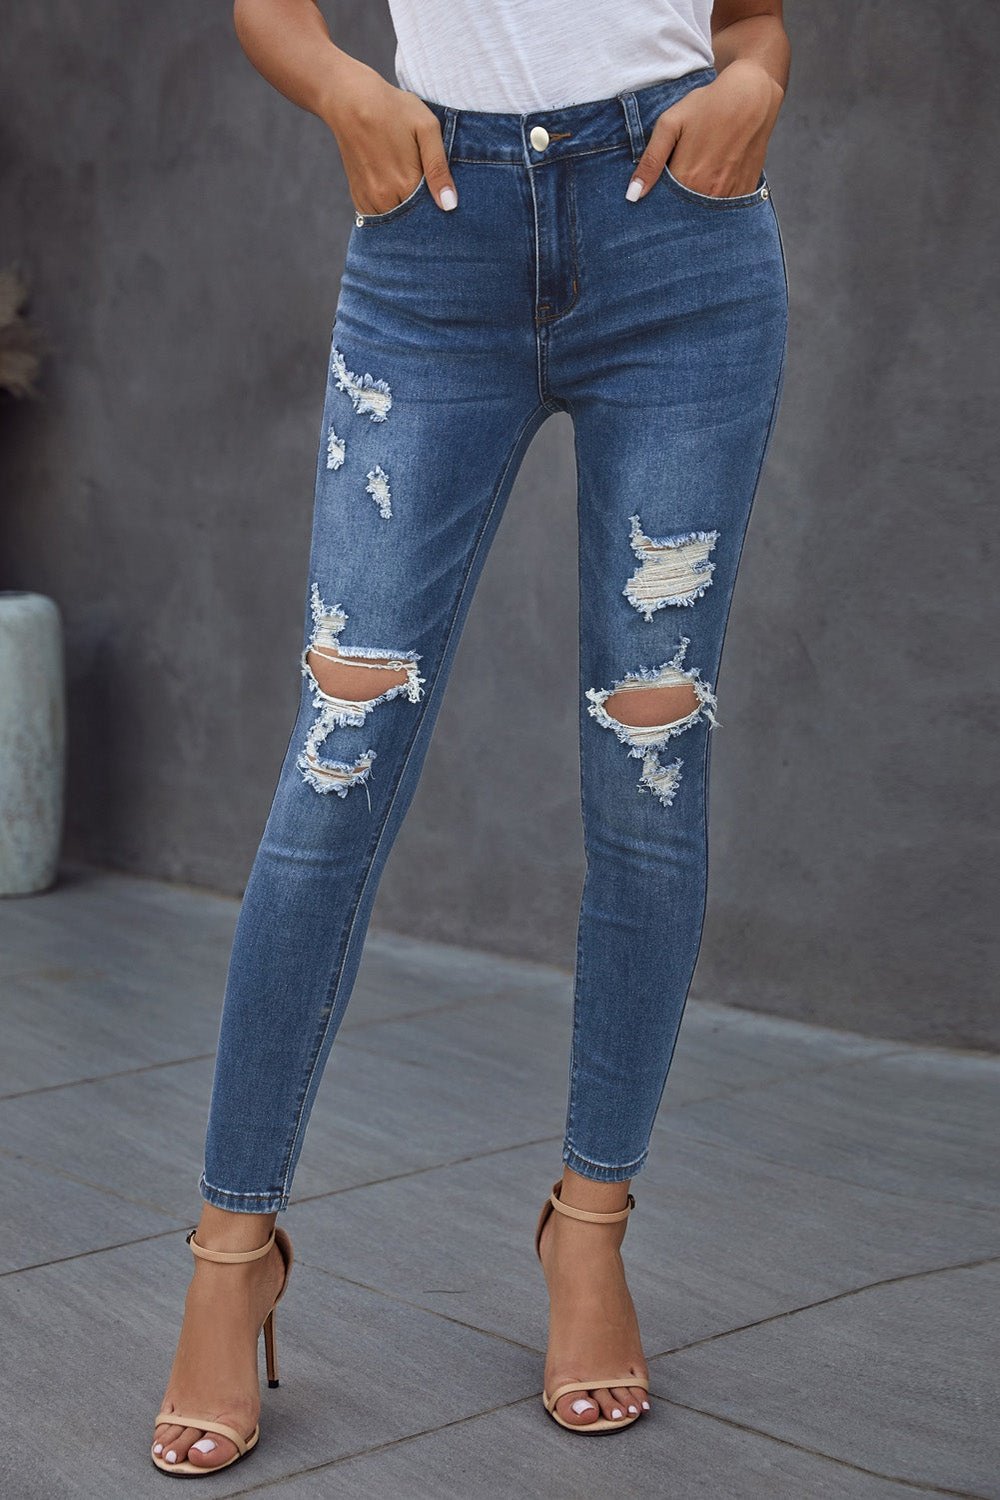 Vintage Skinny Ripped Jeans - Jeans - FITGGINS